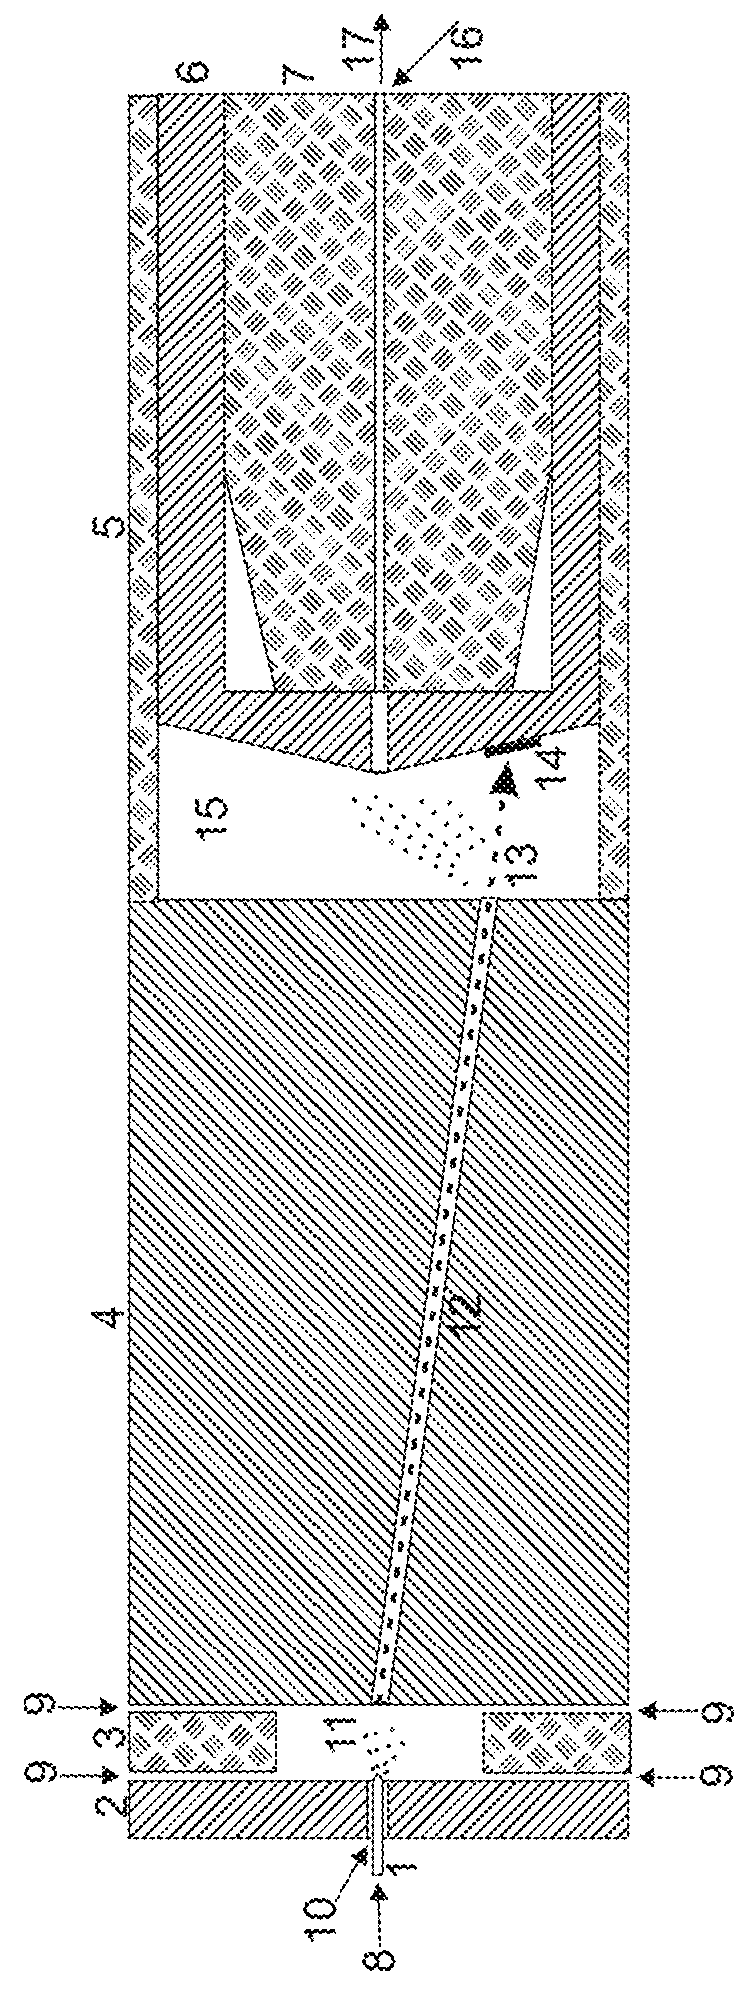 Off-axis channel in electrospray ionization for removal of particulate matter